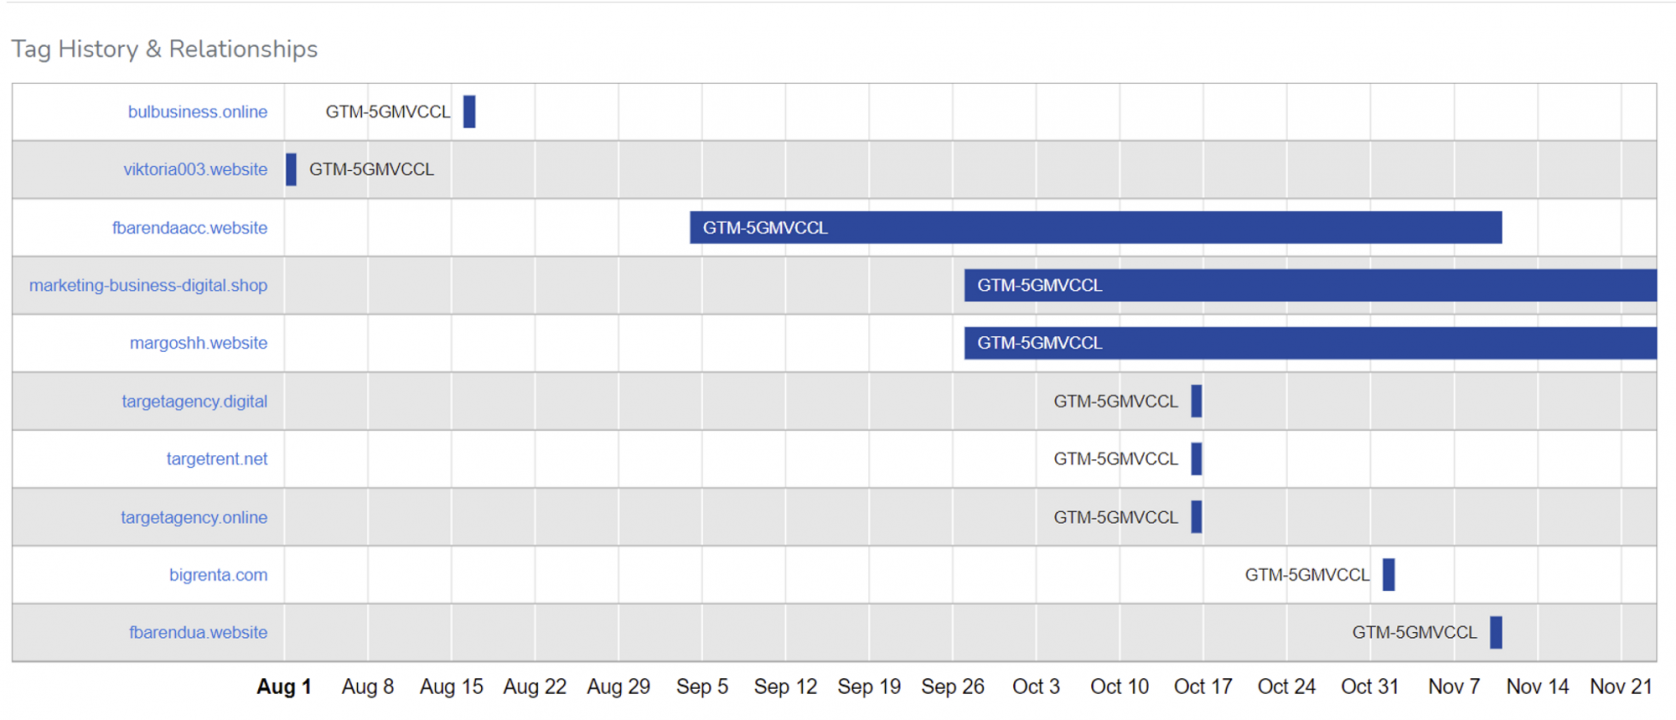 Timeline of Google Tag Manager ID usage over ten websites from August to November 2021.